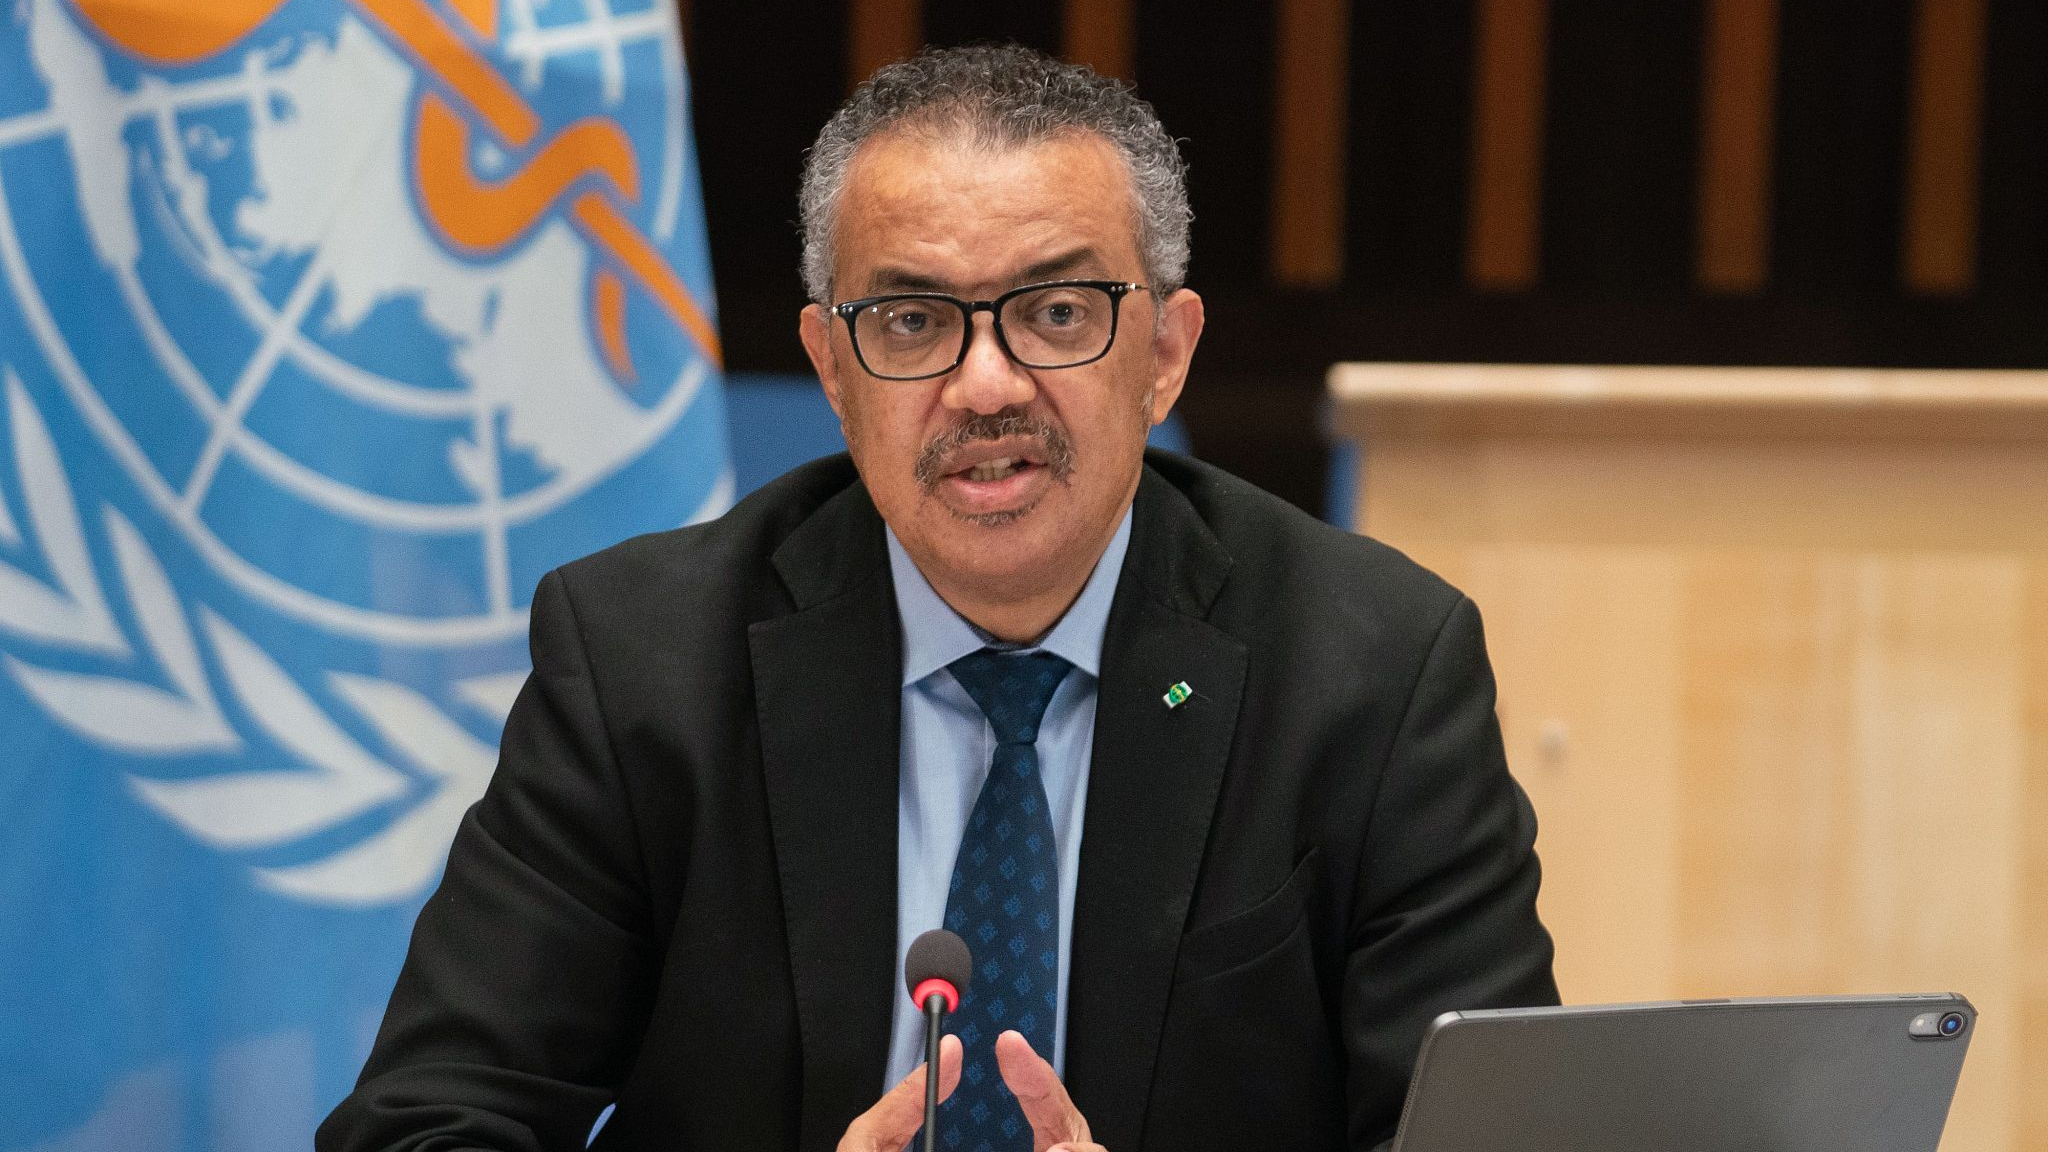 World Health Organization (WHO) Director-General Tedros Adhanom Ghebreyesus delivers remarks during a WHO executive board meeting in Geneva, Switzerland, January 21, 2021. /CFP